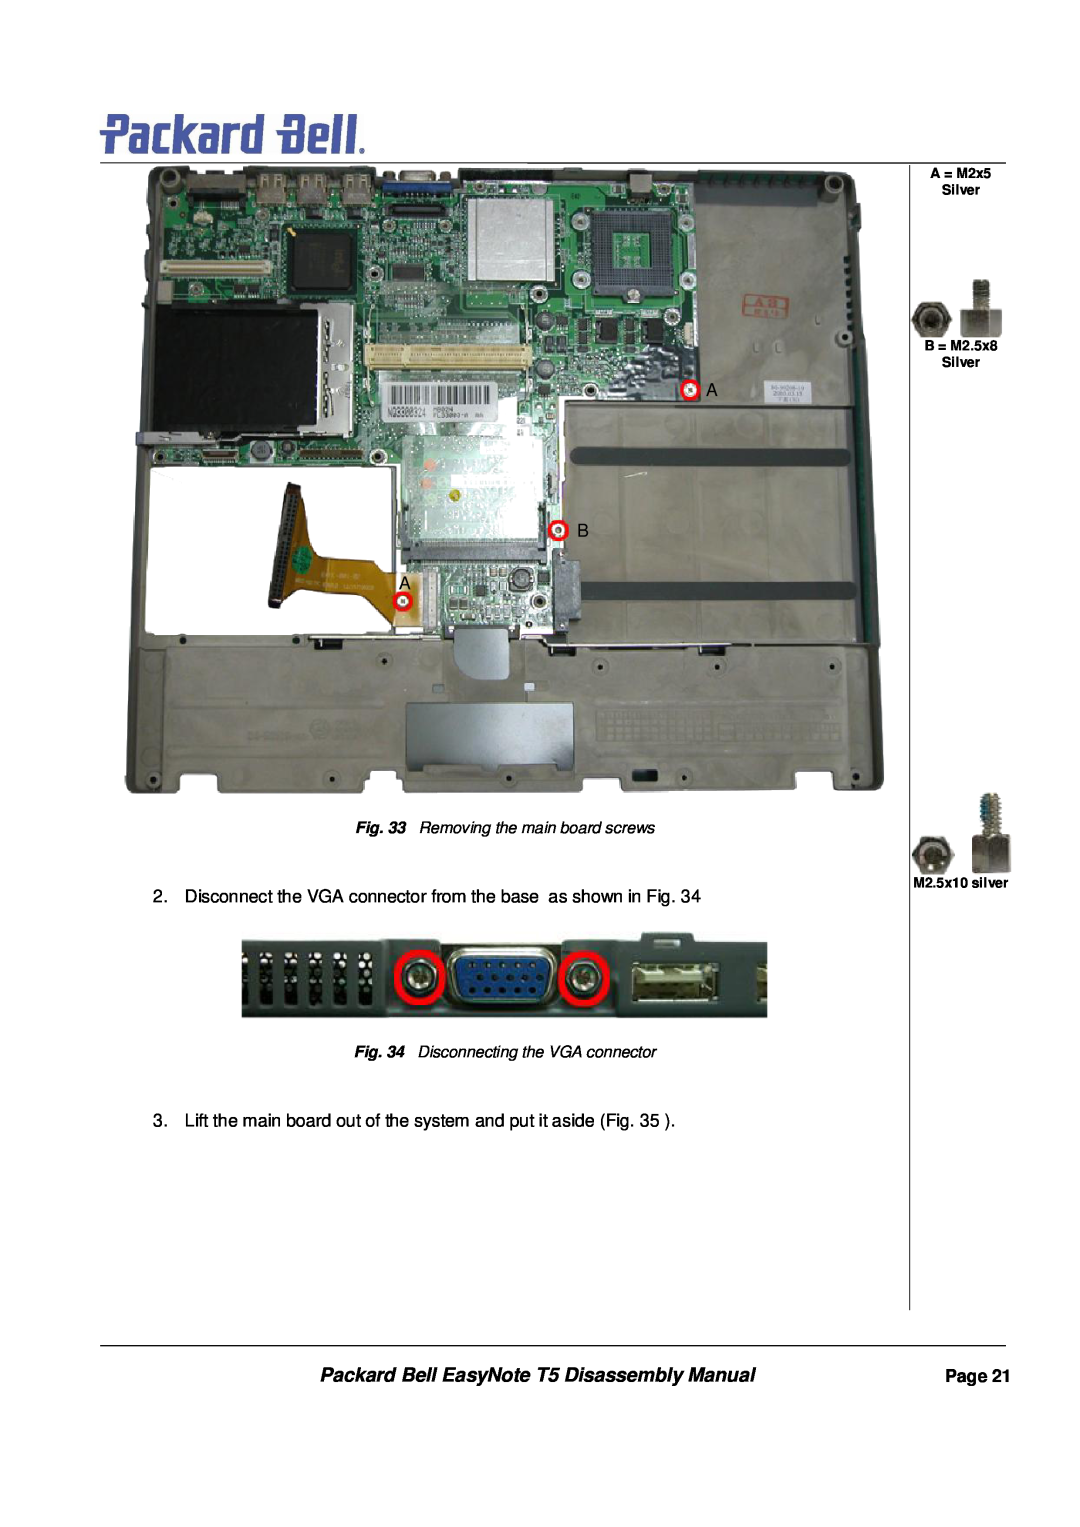 Packard Bell manual Packard Bell EasyNote T5 Disassembly Manual, Removing the main board screws, Page 